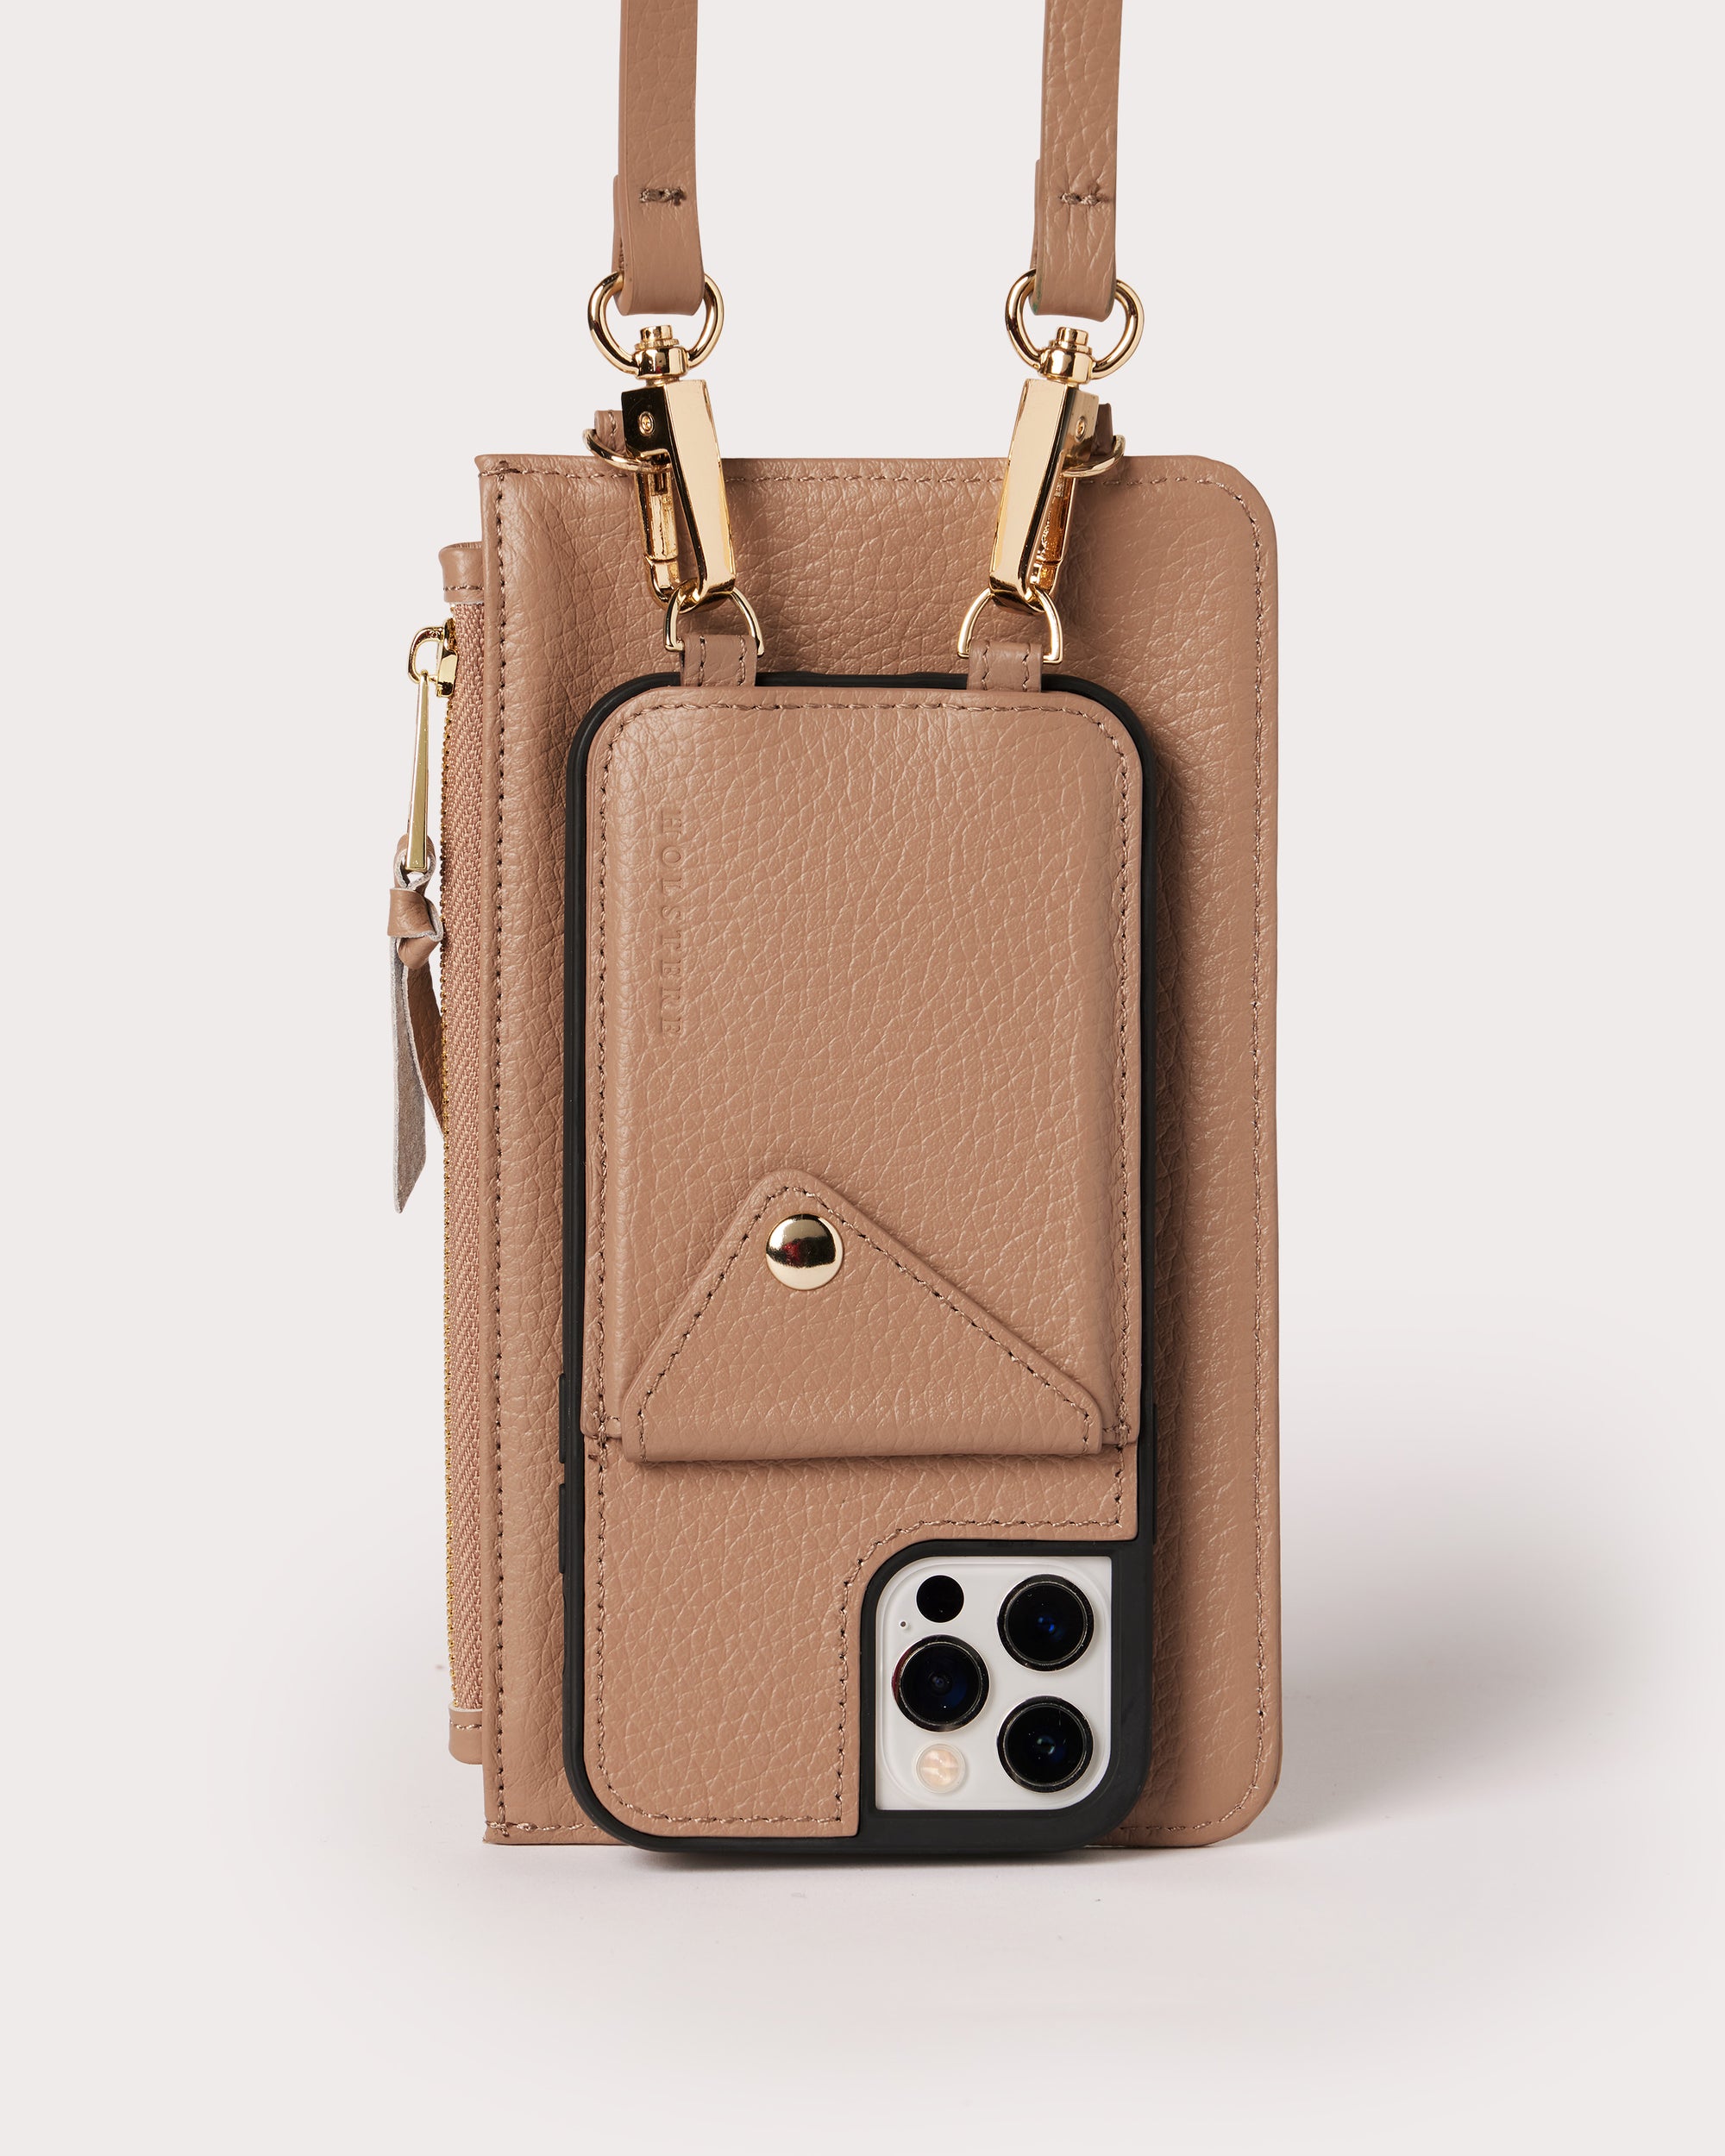 Holstere Genuine Leather iPhone Case Crossbody Phone Purse Cross Body Add On Zipper Zipped Pouch Taupe (Beige / Biscuit / Buff) for Extra Carry Space with Gold Zipper